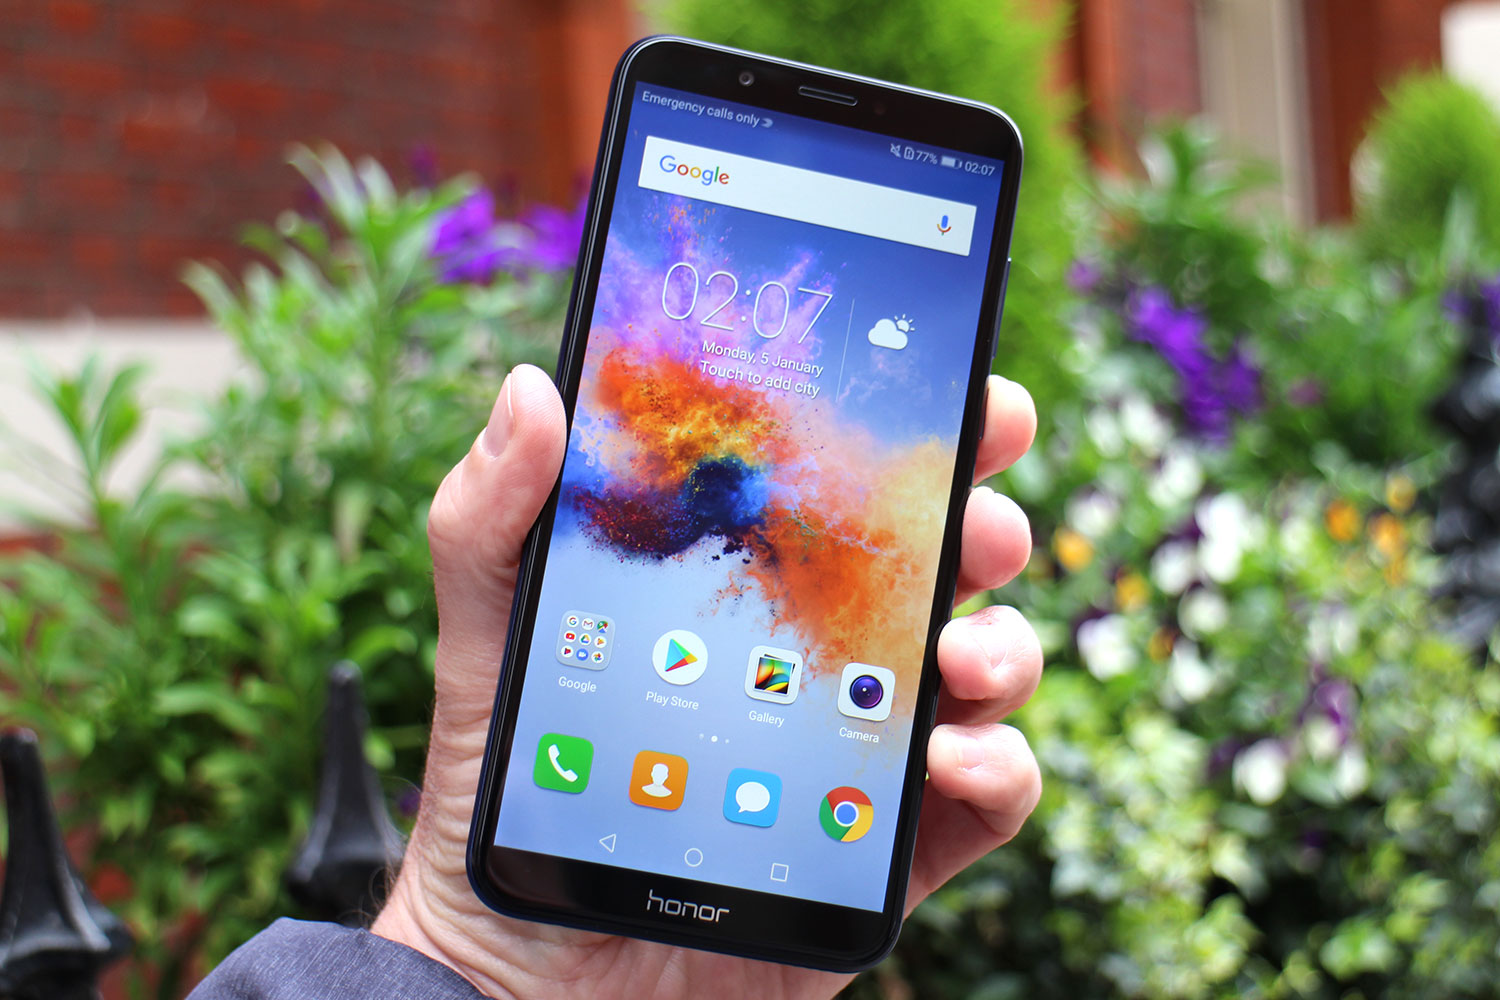 Honor 7C and Honor 7A review